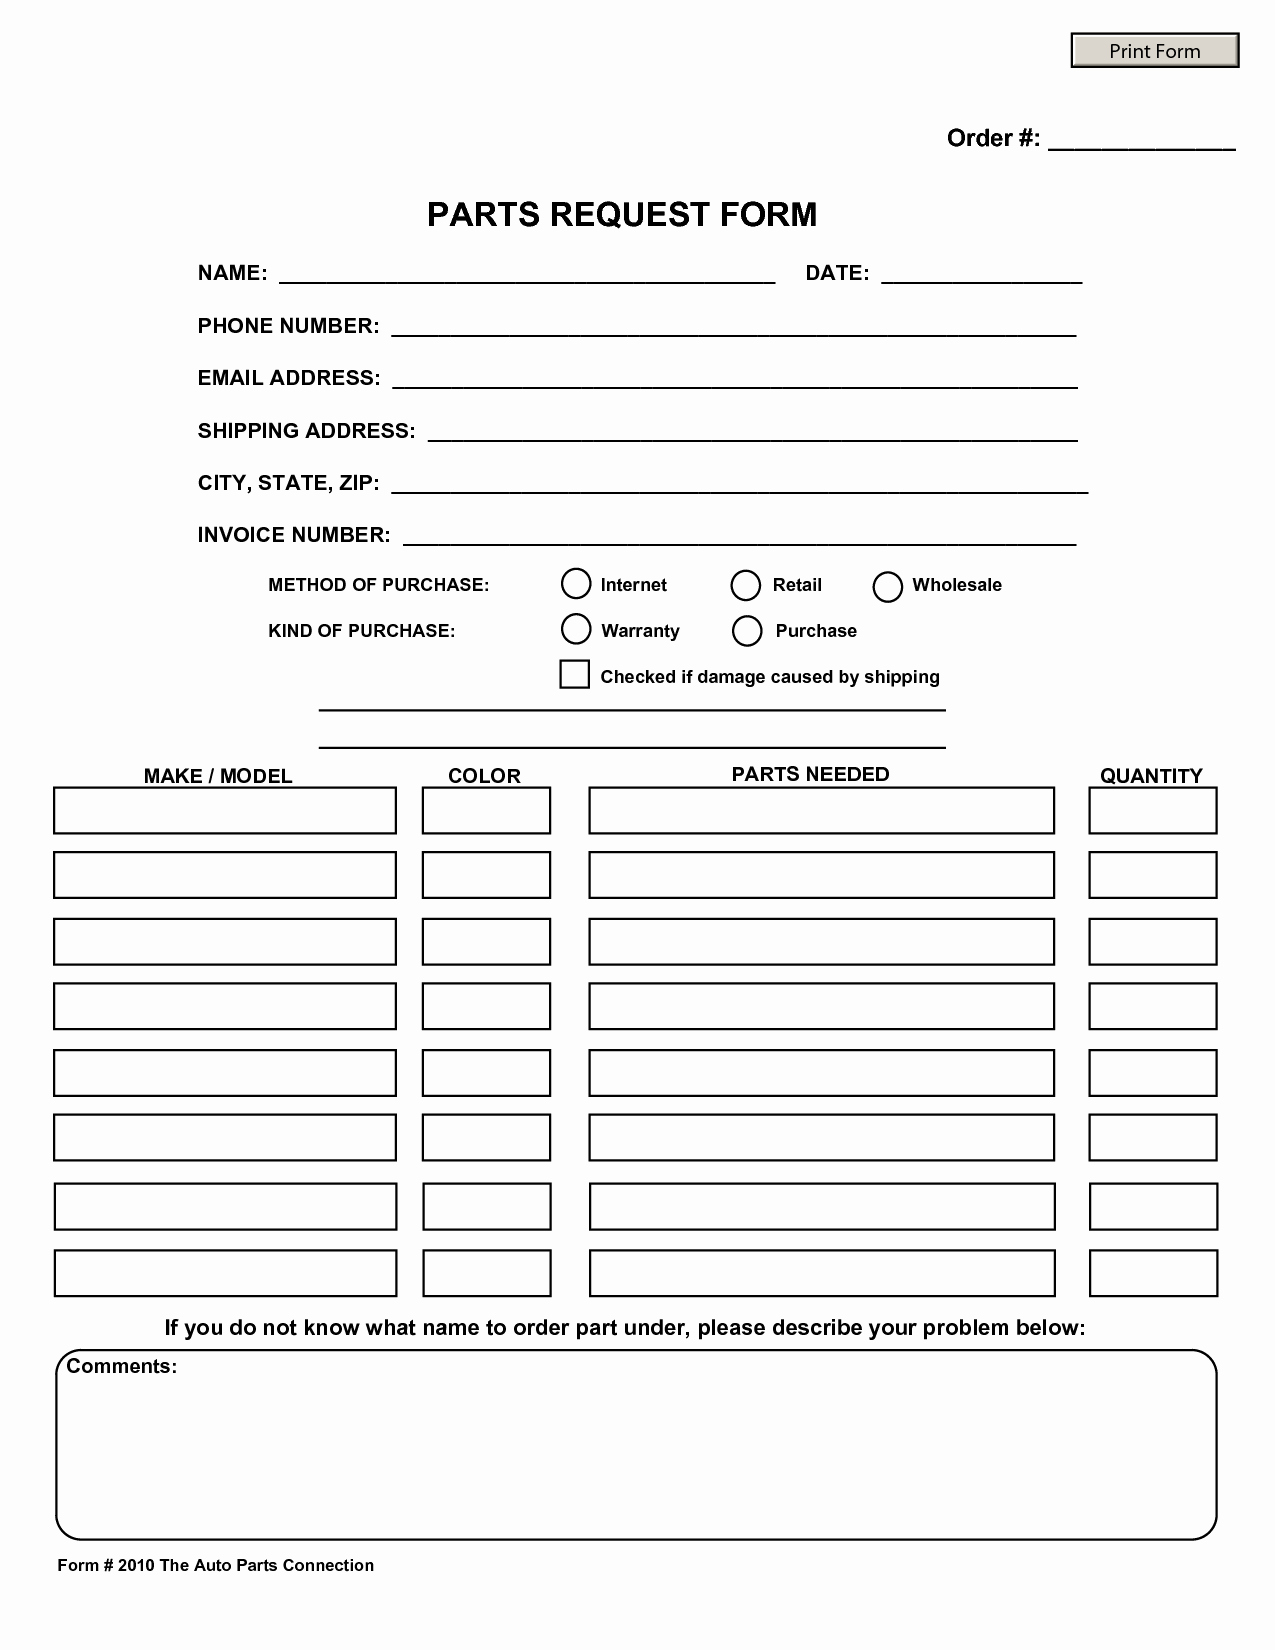 Parts order form Template Excel Inspirational Best S Of Shipping Request form Template Ups